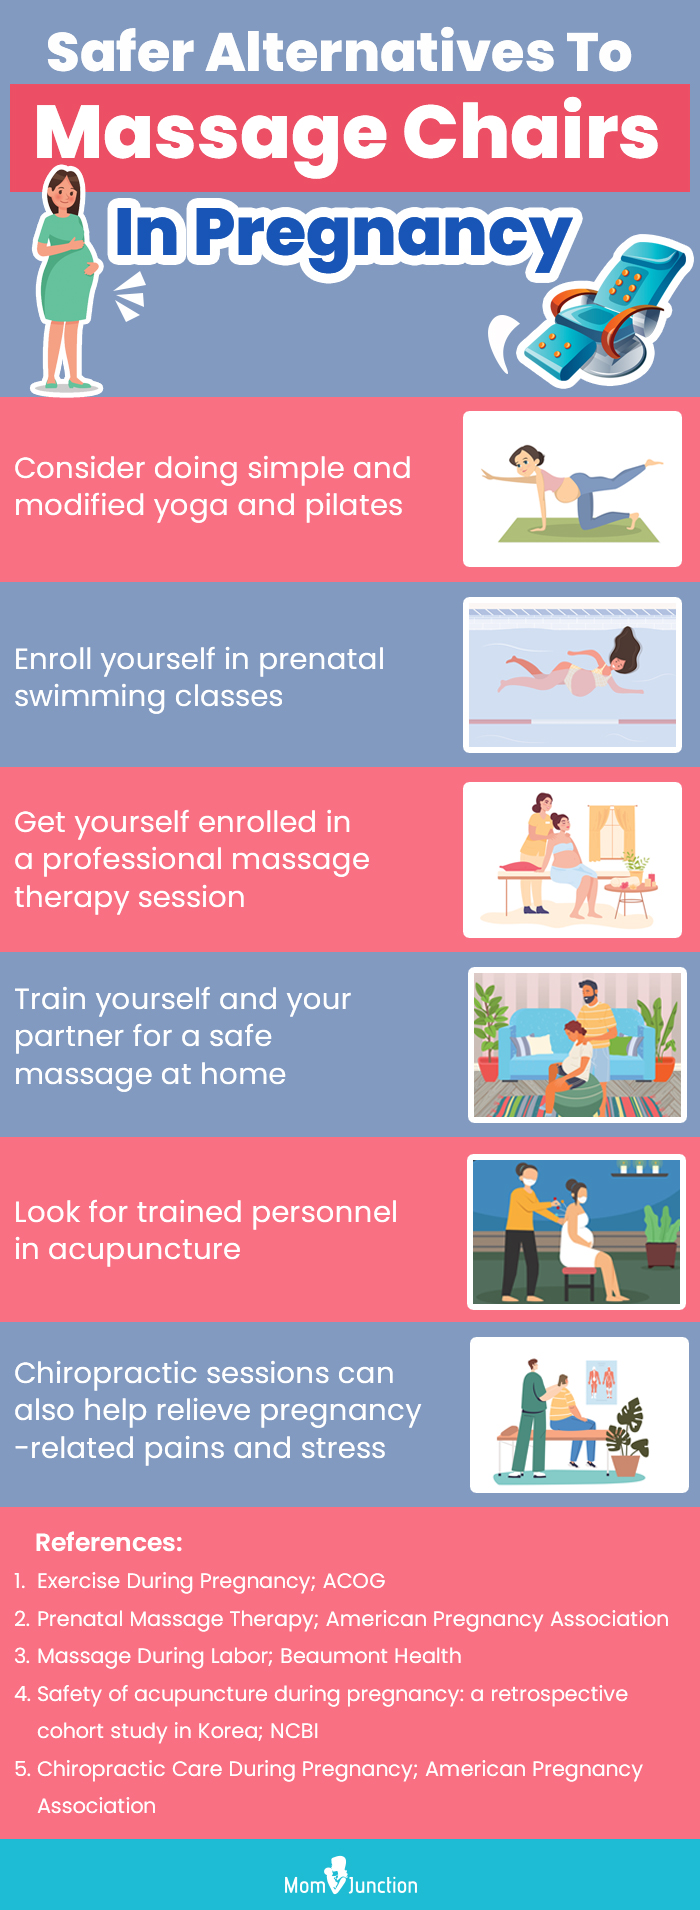 Is massage safe during pregnancy?, Your Pregnancy Matters